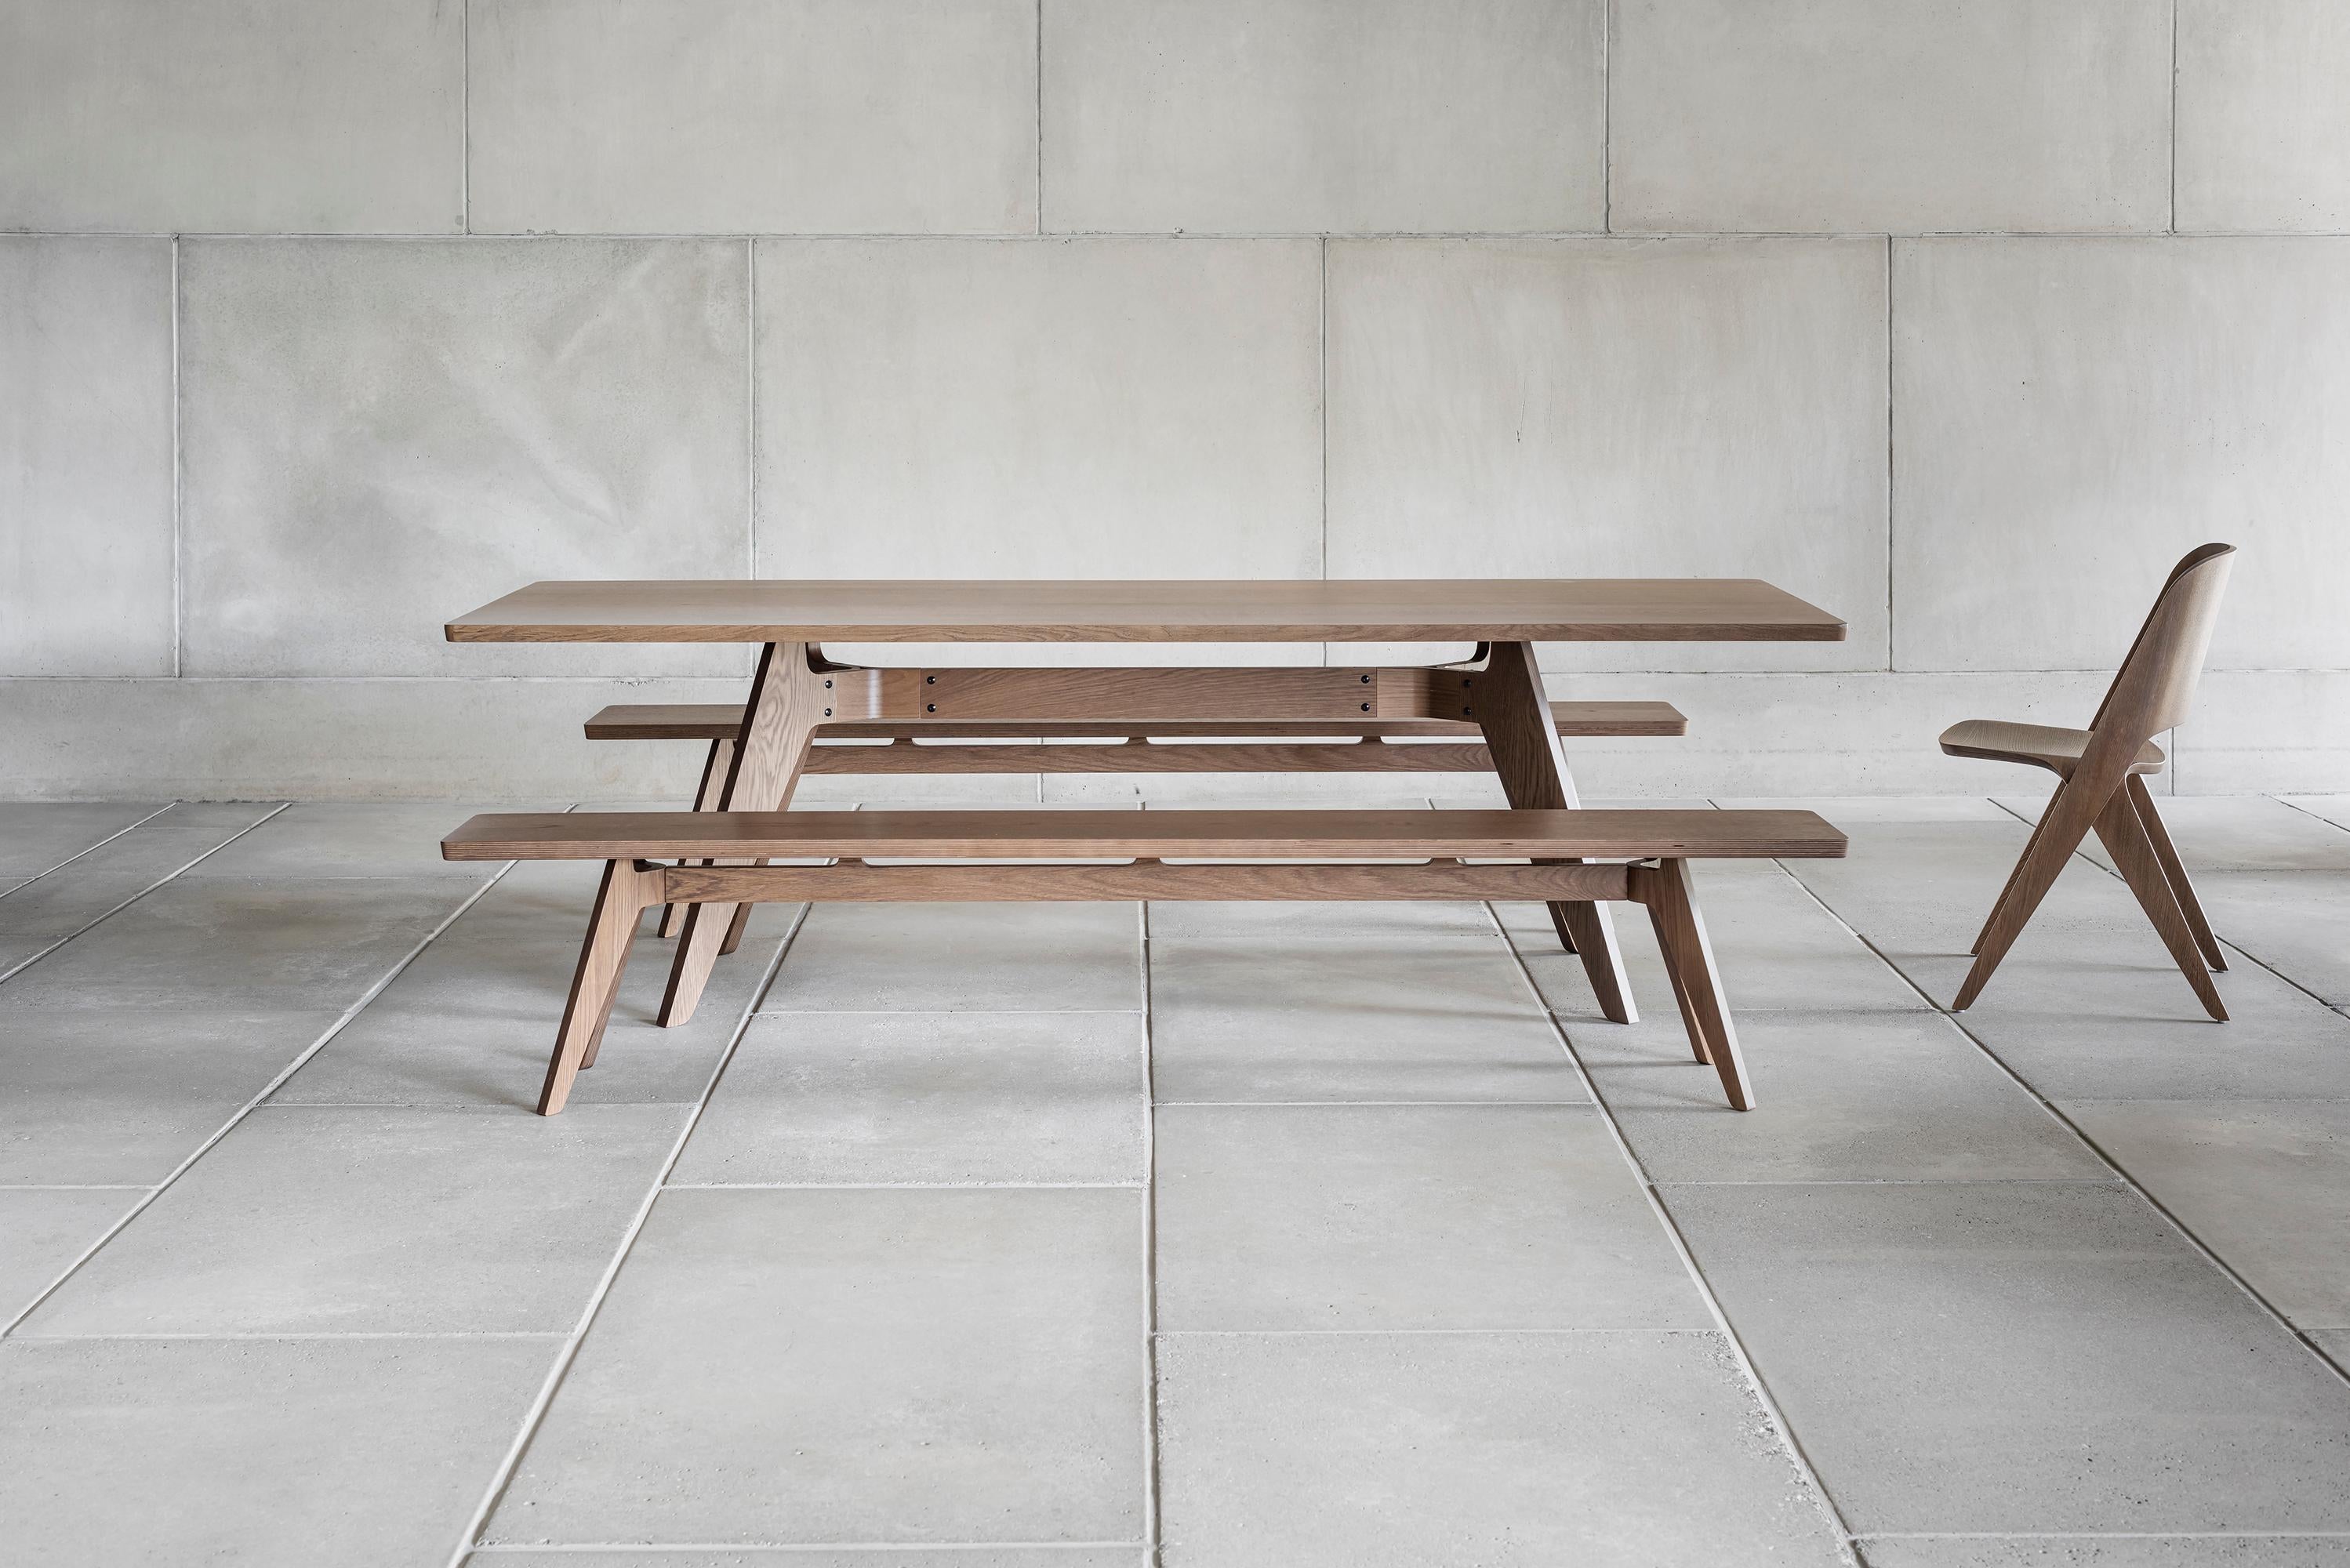 Lavitta dining table 240 cm designed by Timo Mikkonen & Antti Rouhunkoski
Collection Lavitta 2016 by Poiat 

Model shown on picture
Dimensions : H. 72 cm x W. 240 cm x D. 90 cm
Color : Dark Oak 

The Lavitta Collection draws upon the